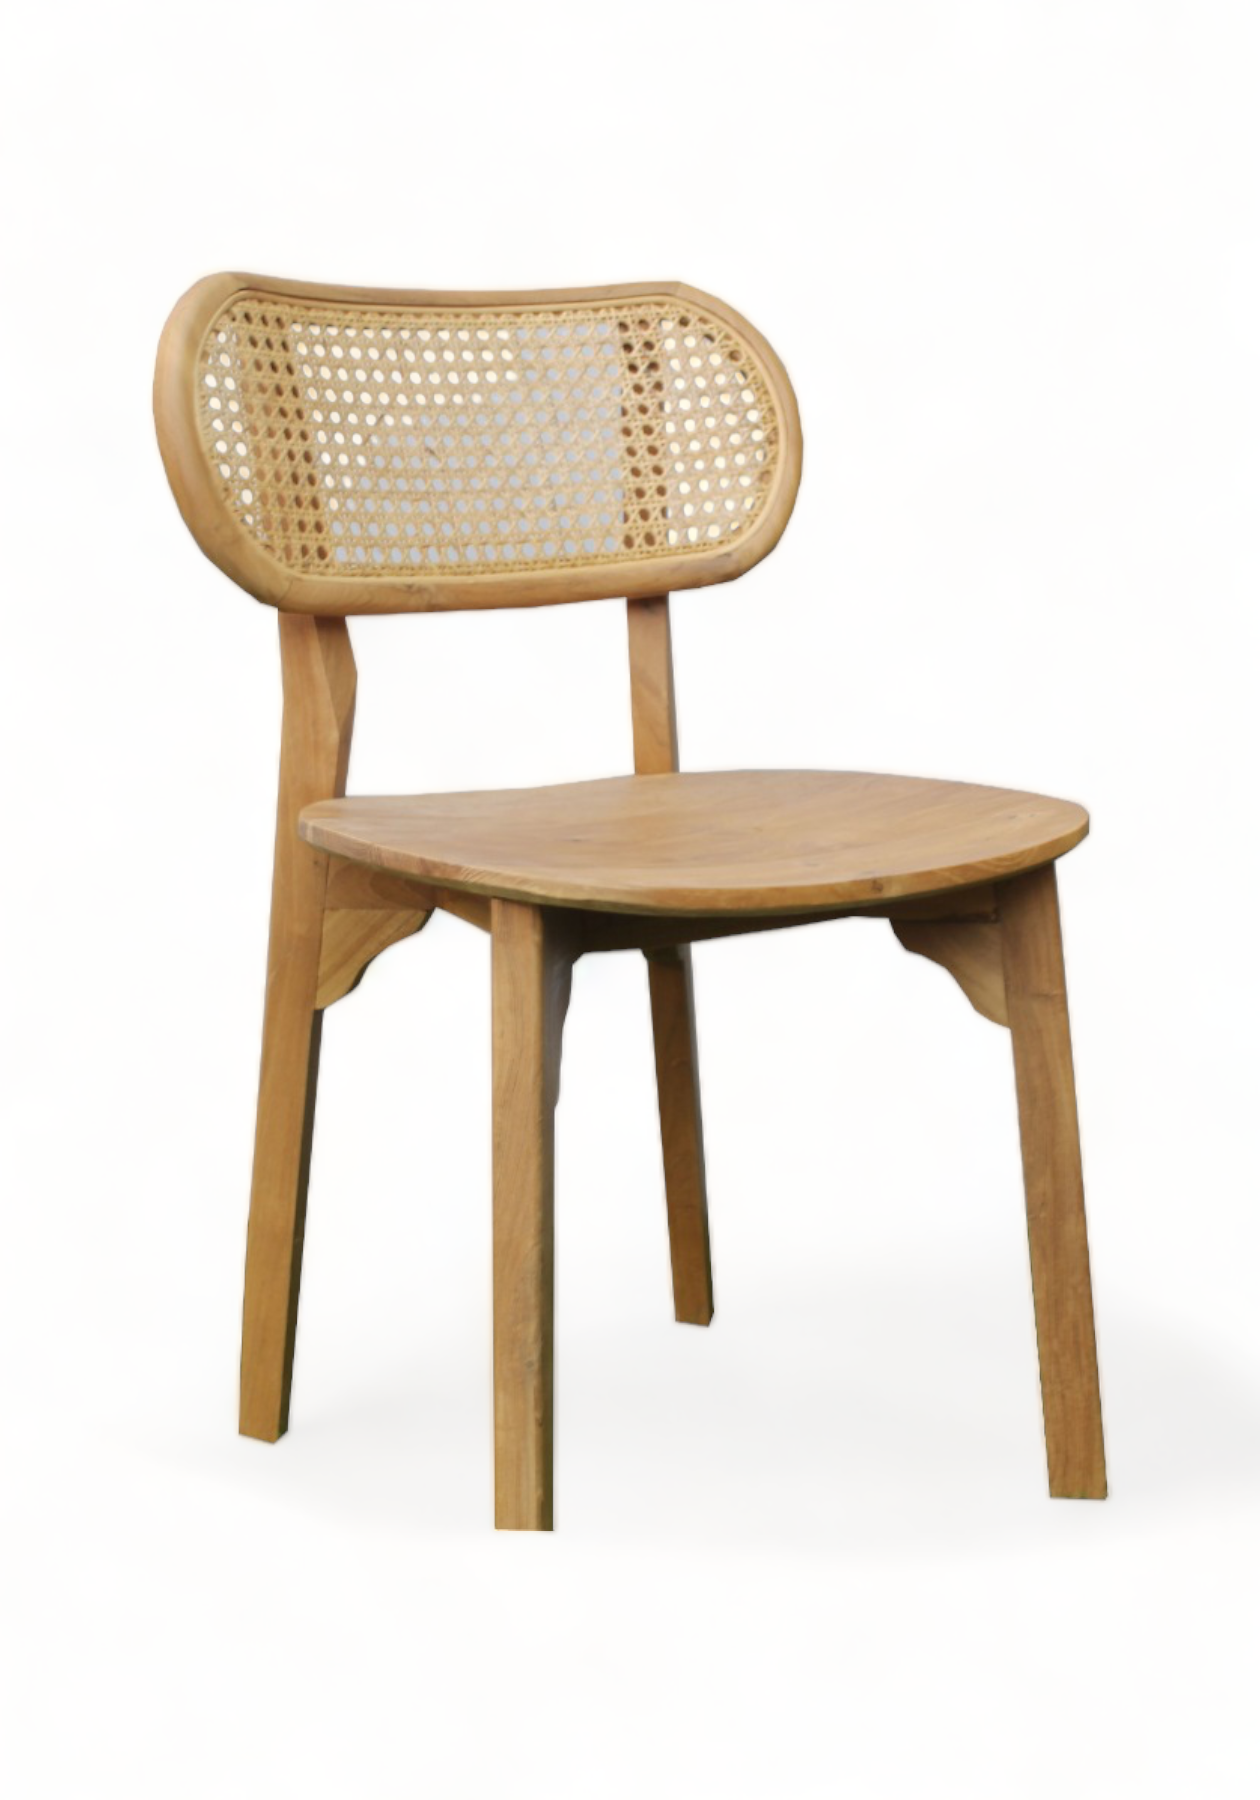 Explore Affordable Bali Rattan Chairs - Elevate Your Space with ...